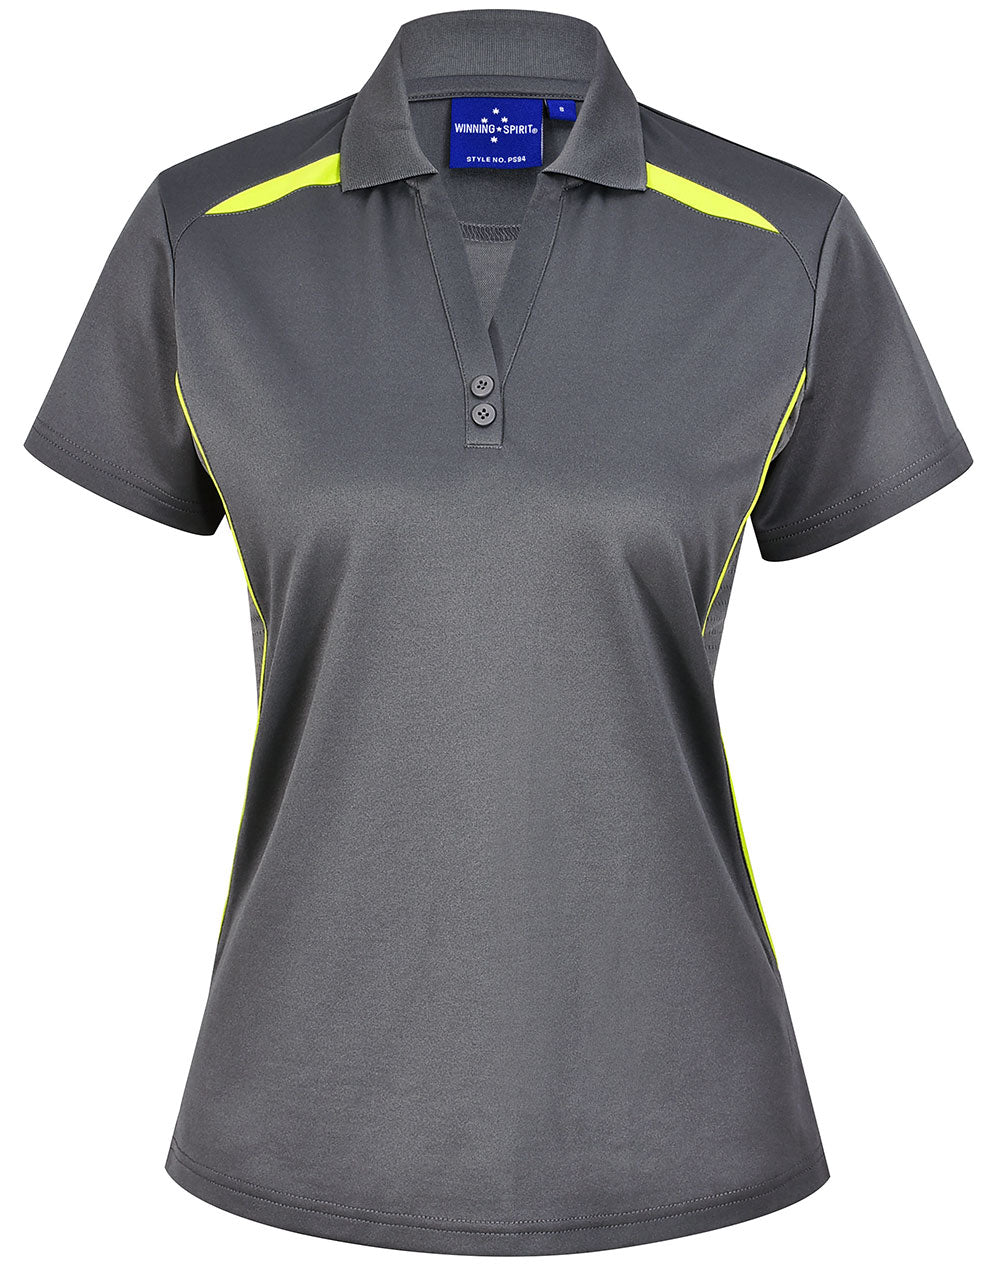 Winning Spirit Women's Sustainable Poly-Cotton Contrast Polo PS94 Casual Wear Winning Spirit Ash/Lime 8 